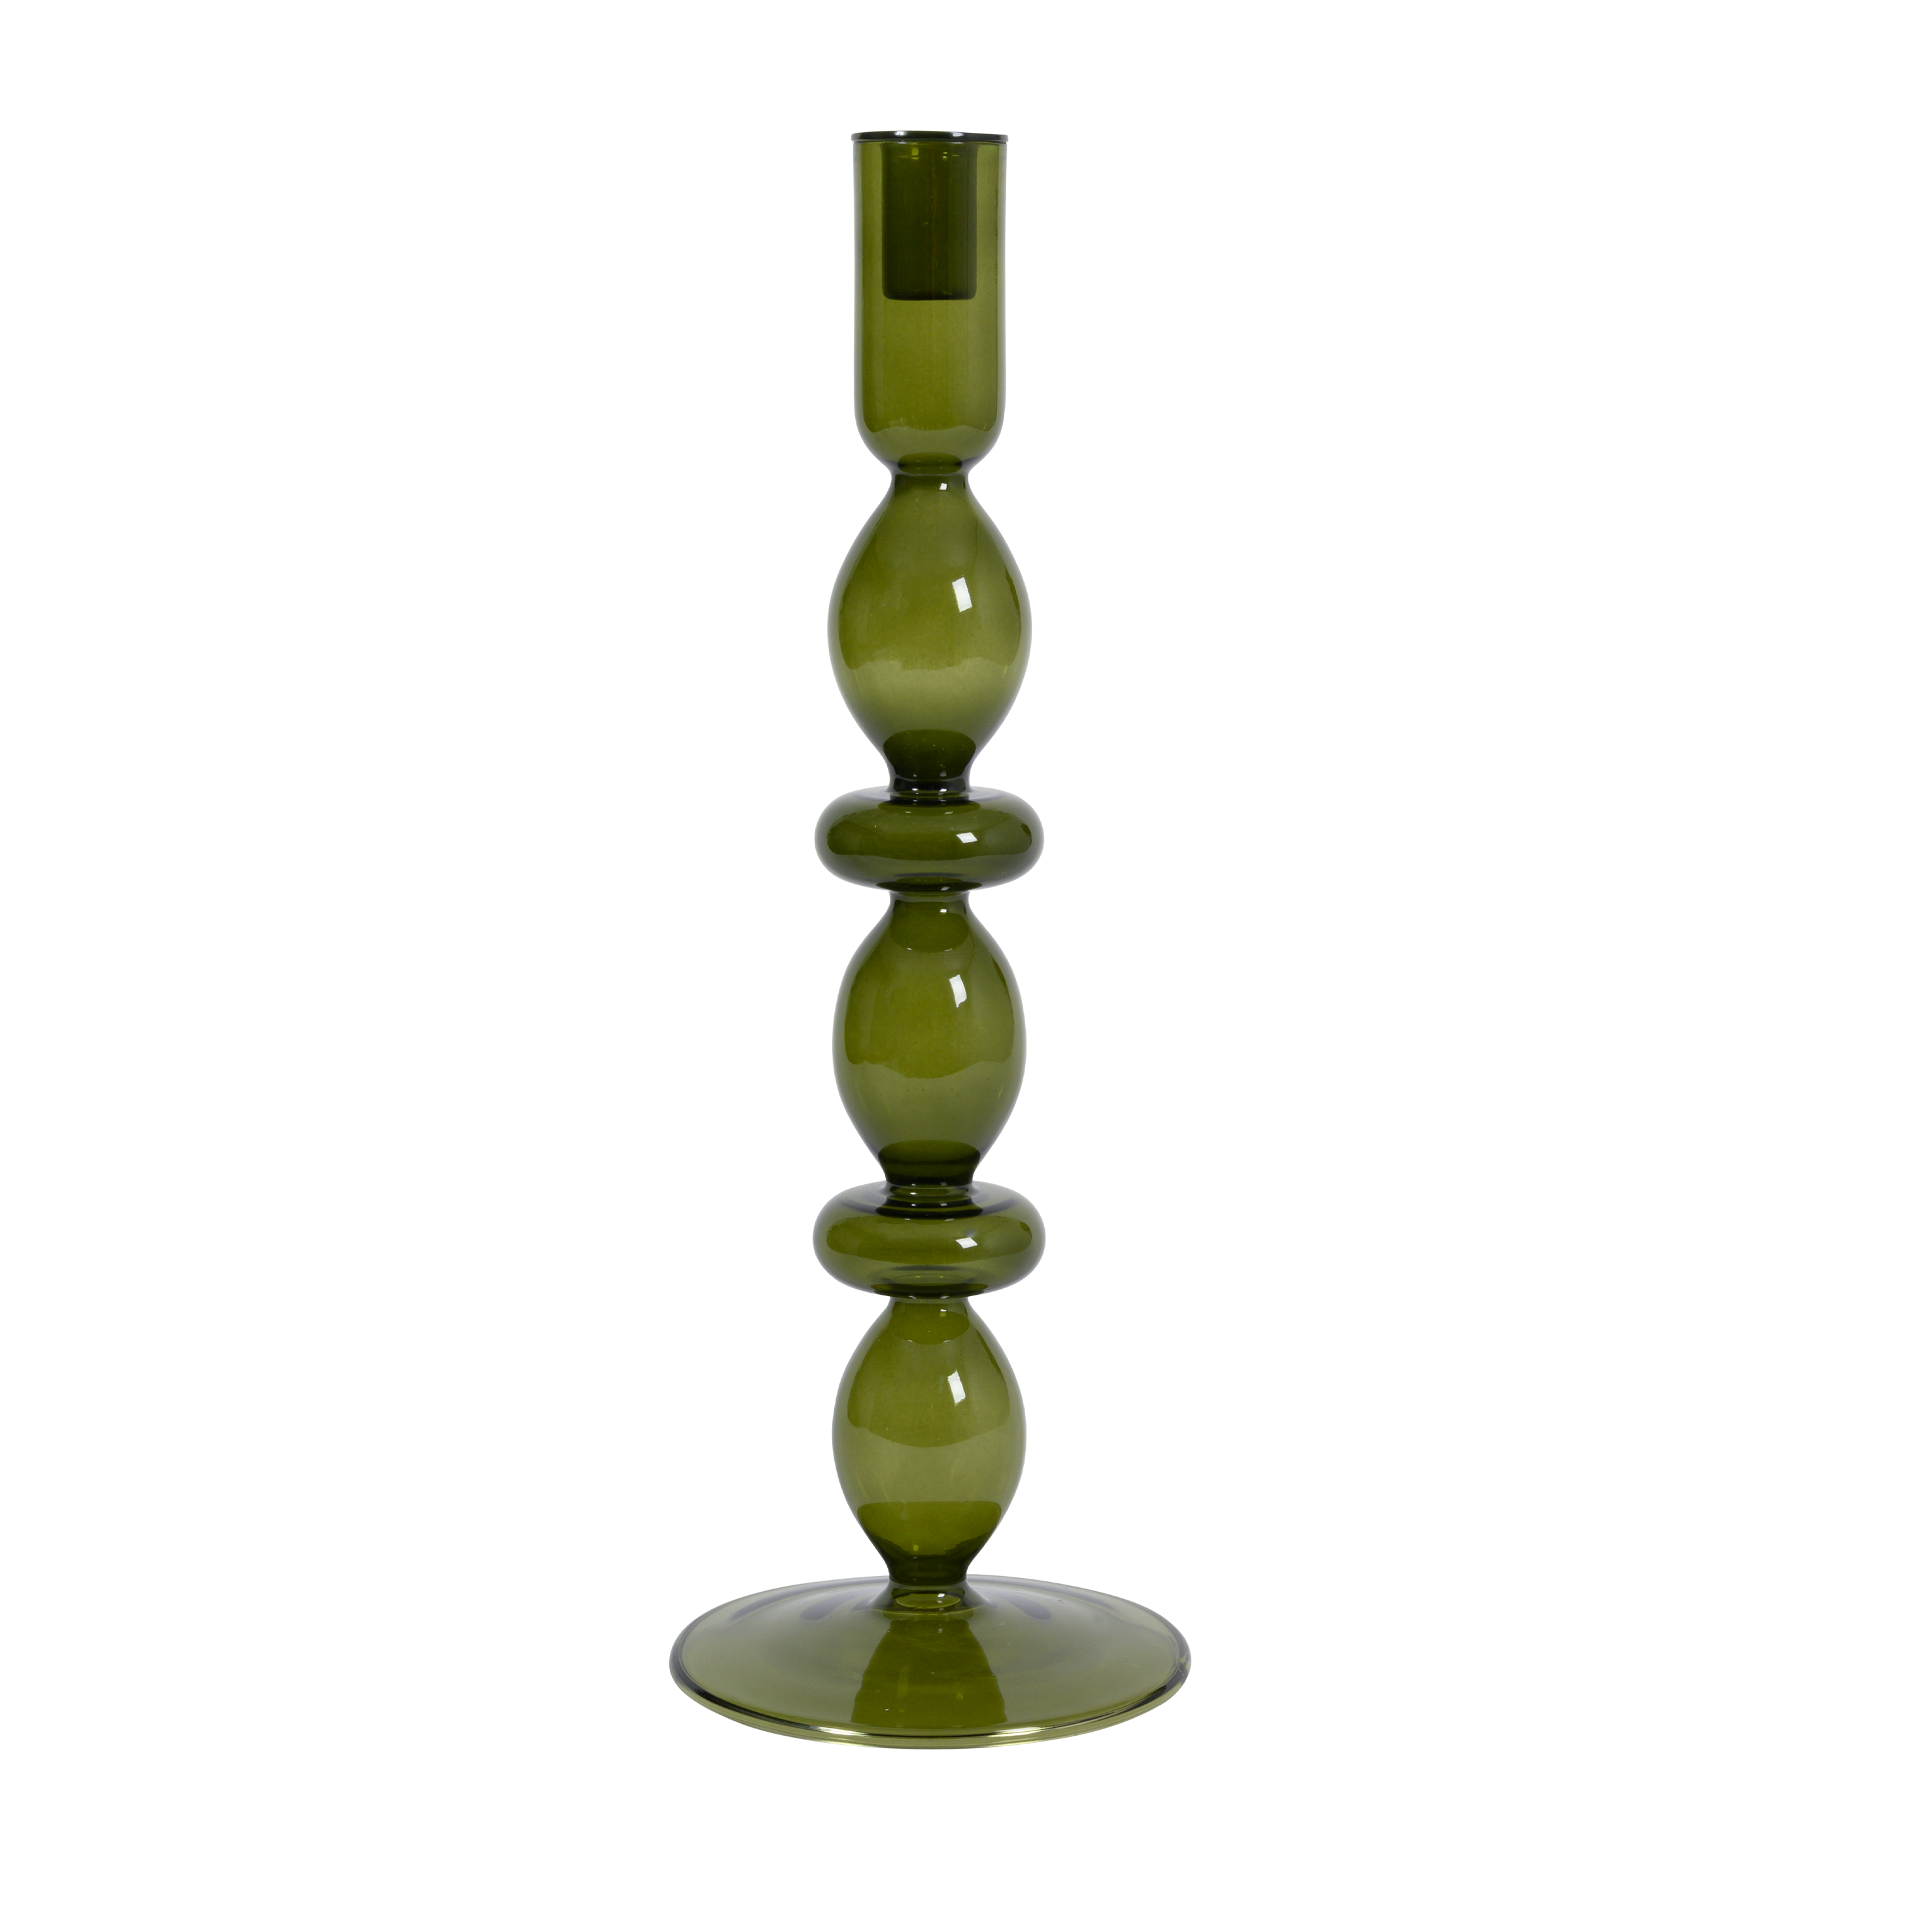 Urban Nature Culture Candle holder recycled glass L - FIR GREEN